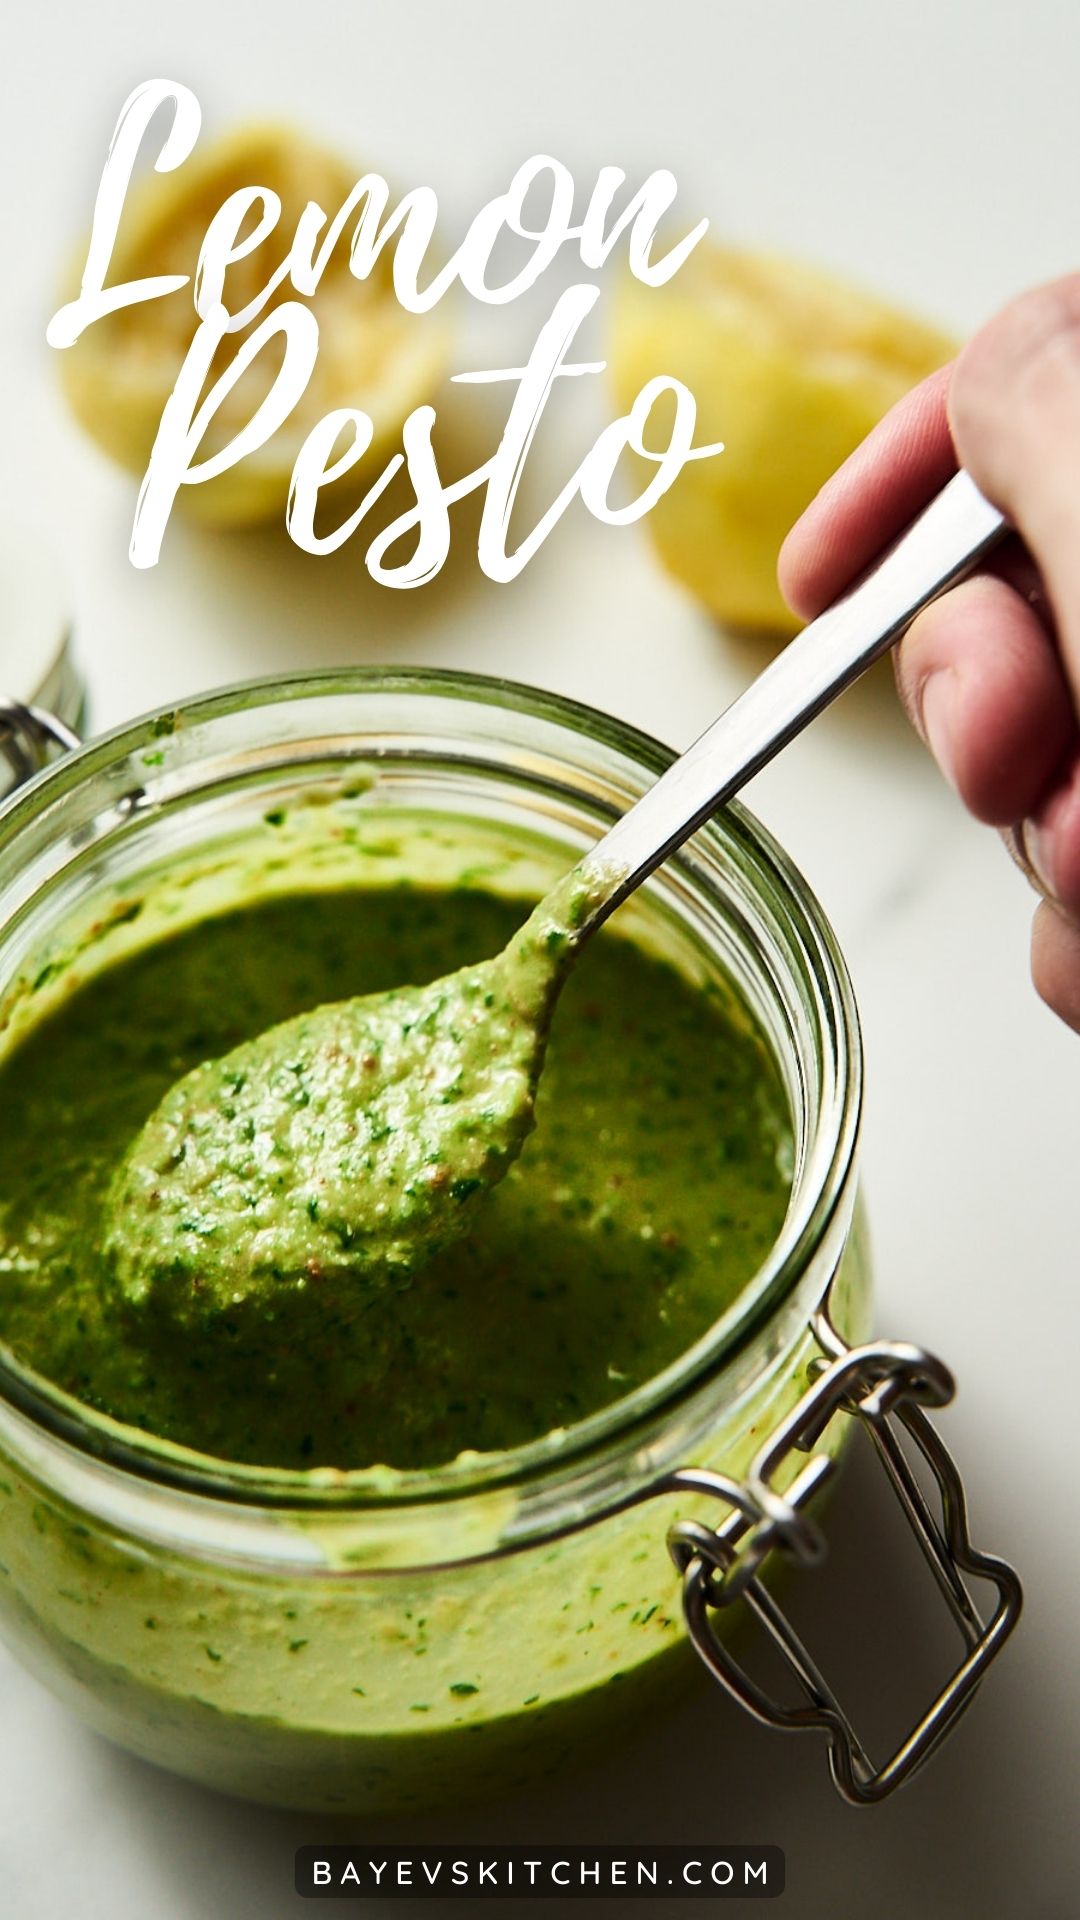 Quick And Easy Lemon Pesto Recipe with Step By Step Video Instructions